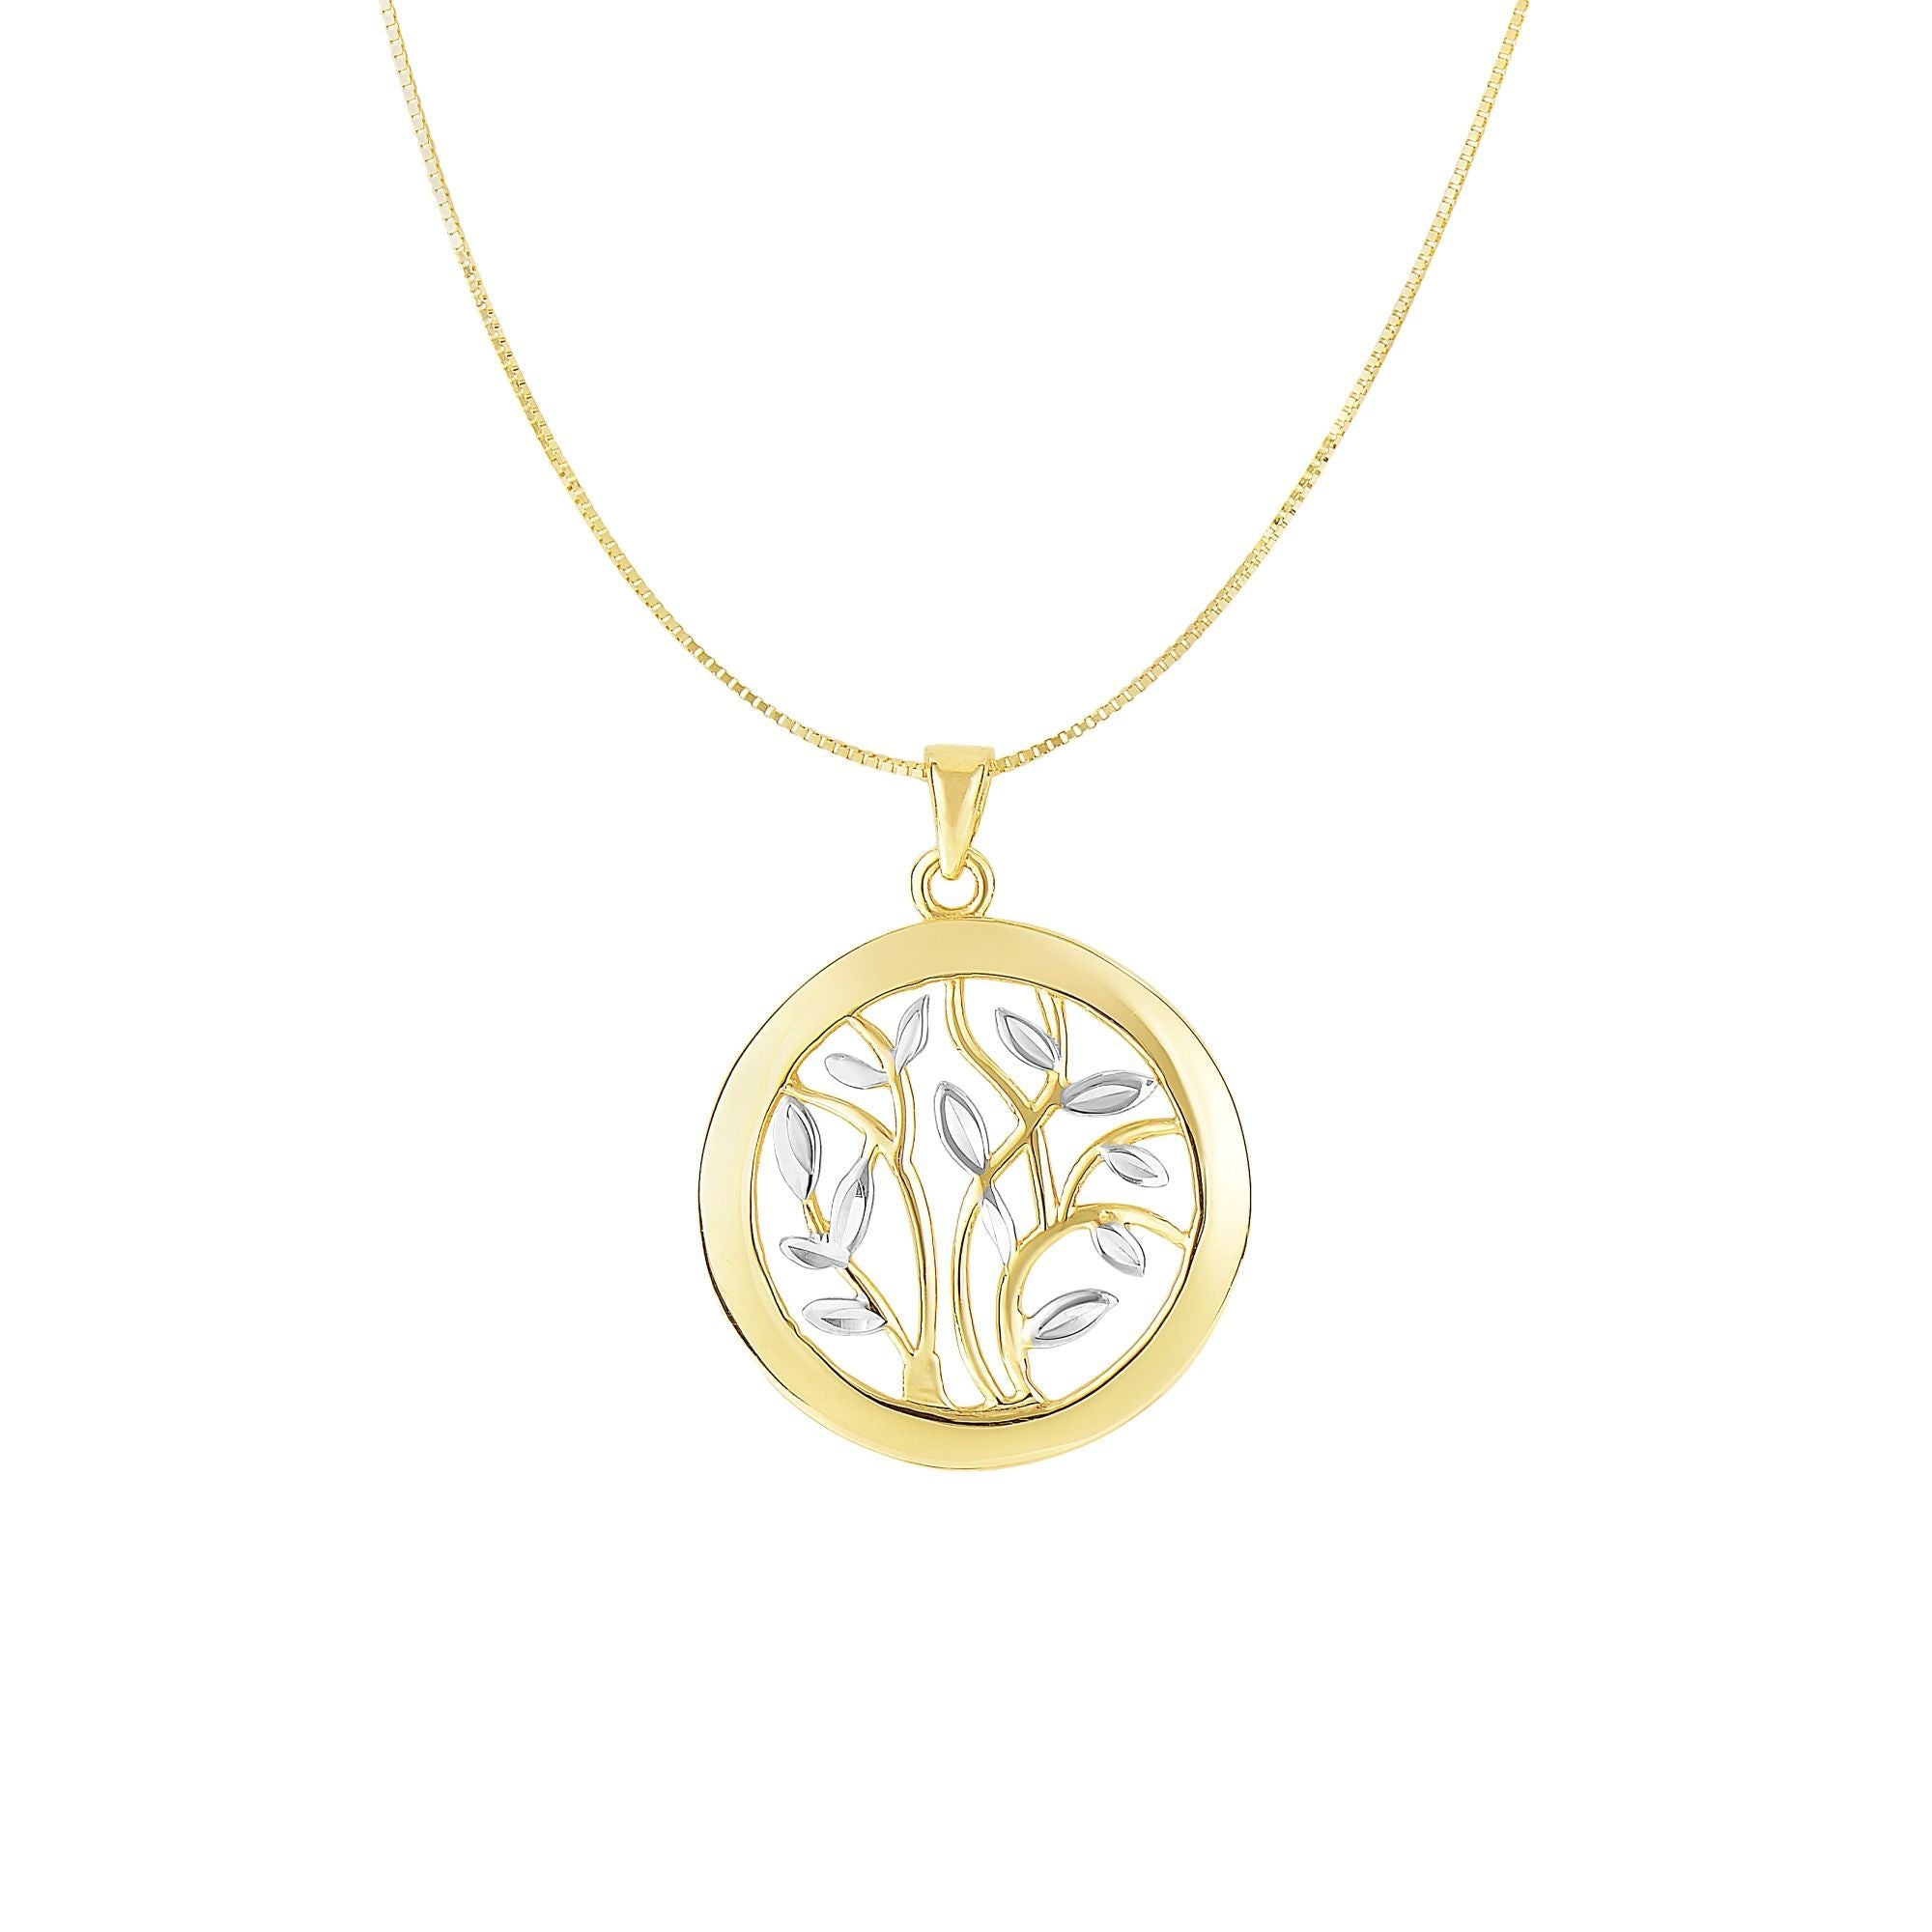 Minimalist Solid Gold Life of Tree Charm Necklace - wingroupjewelry